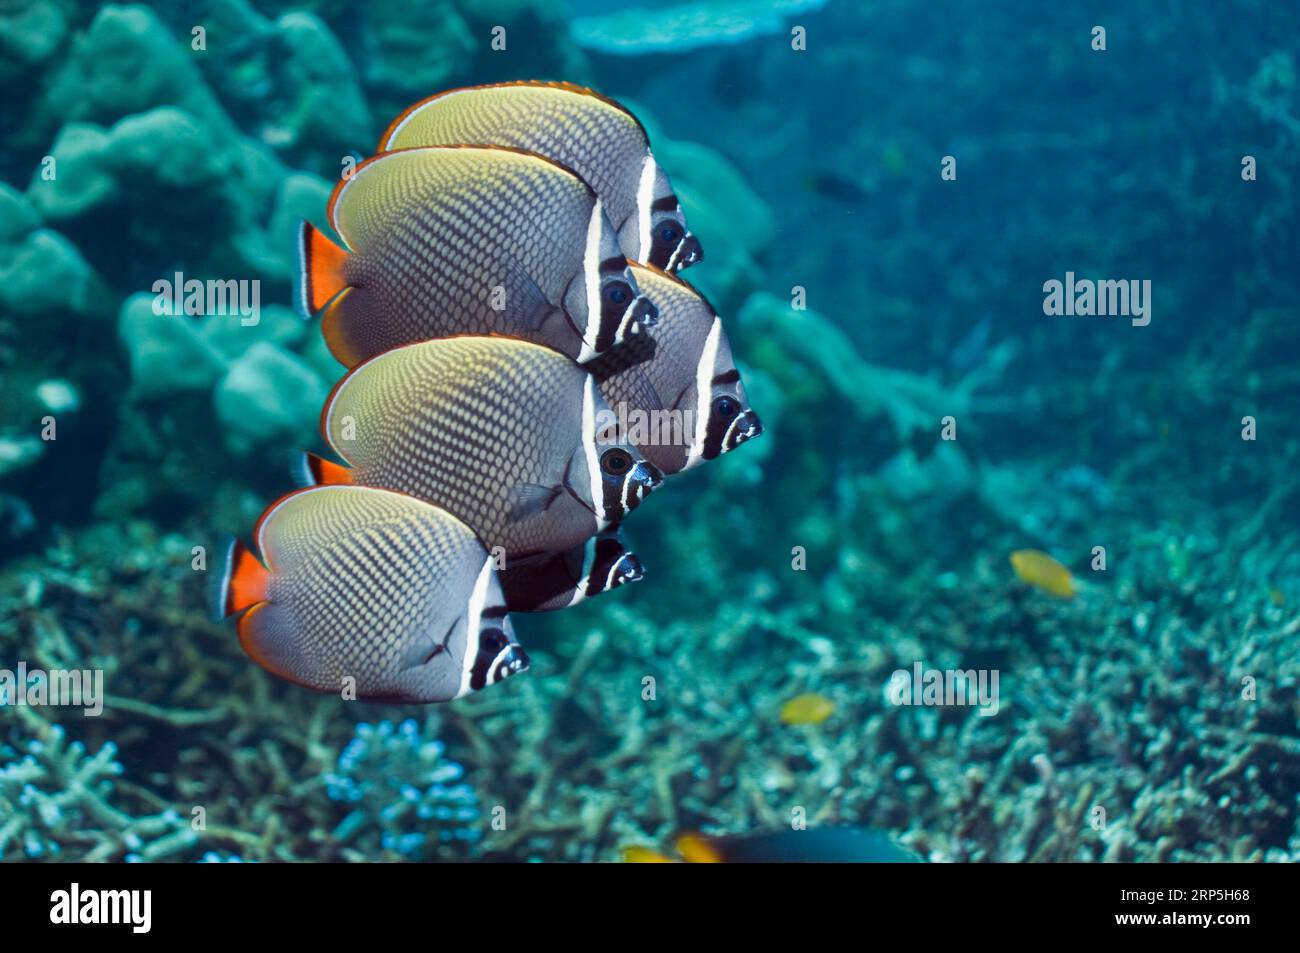 Redtail or Collared butterflyfish (Chaetodon collare).  Andaman Sea, Thailand.  (Digital capture). Stock Photo